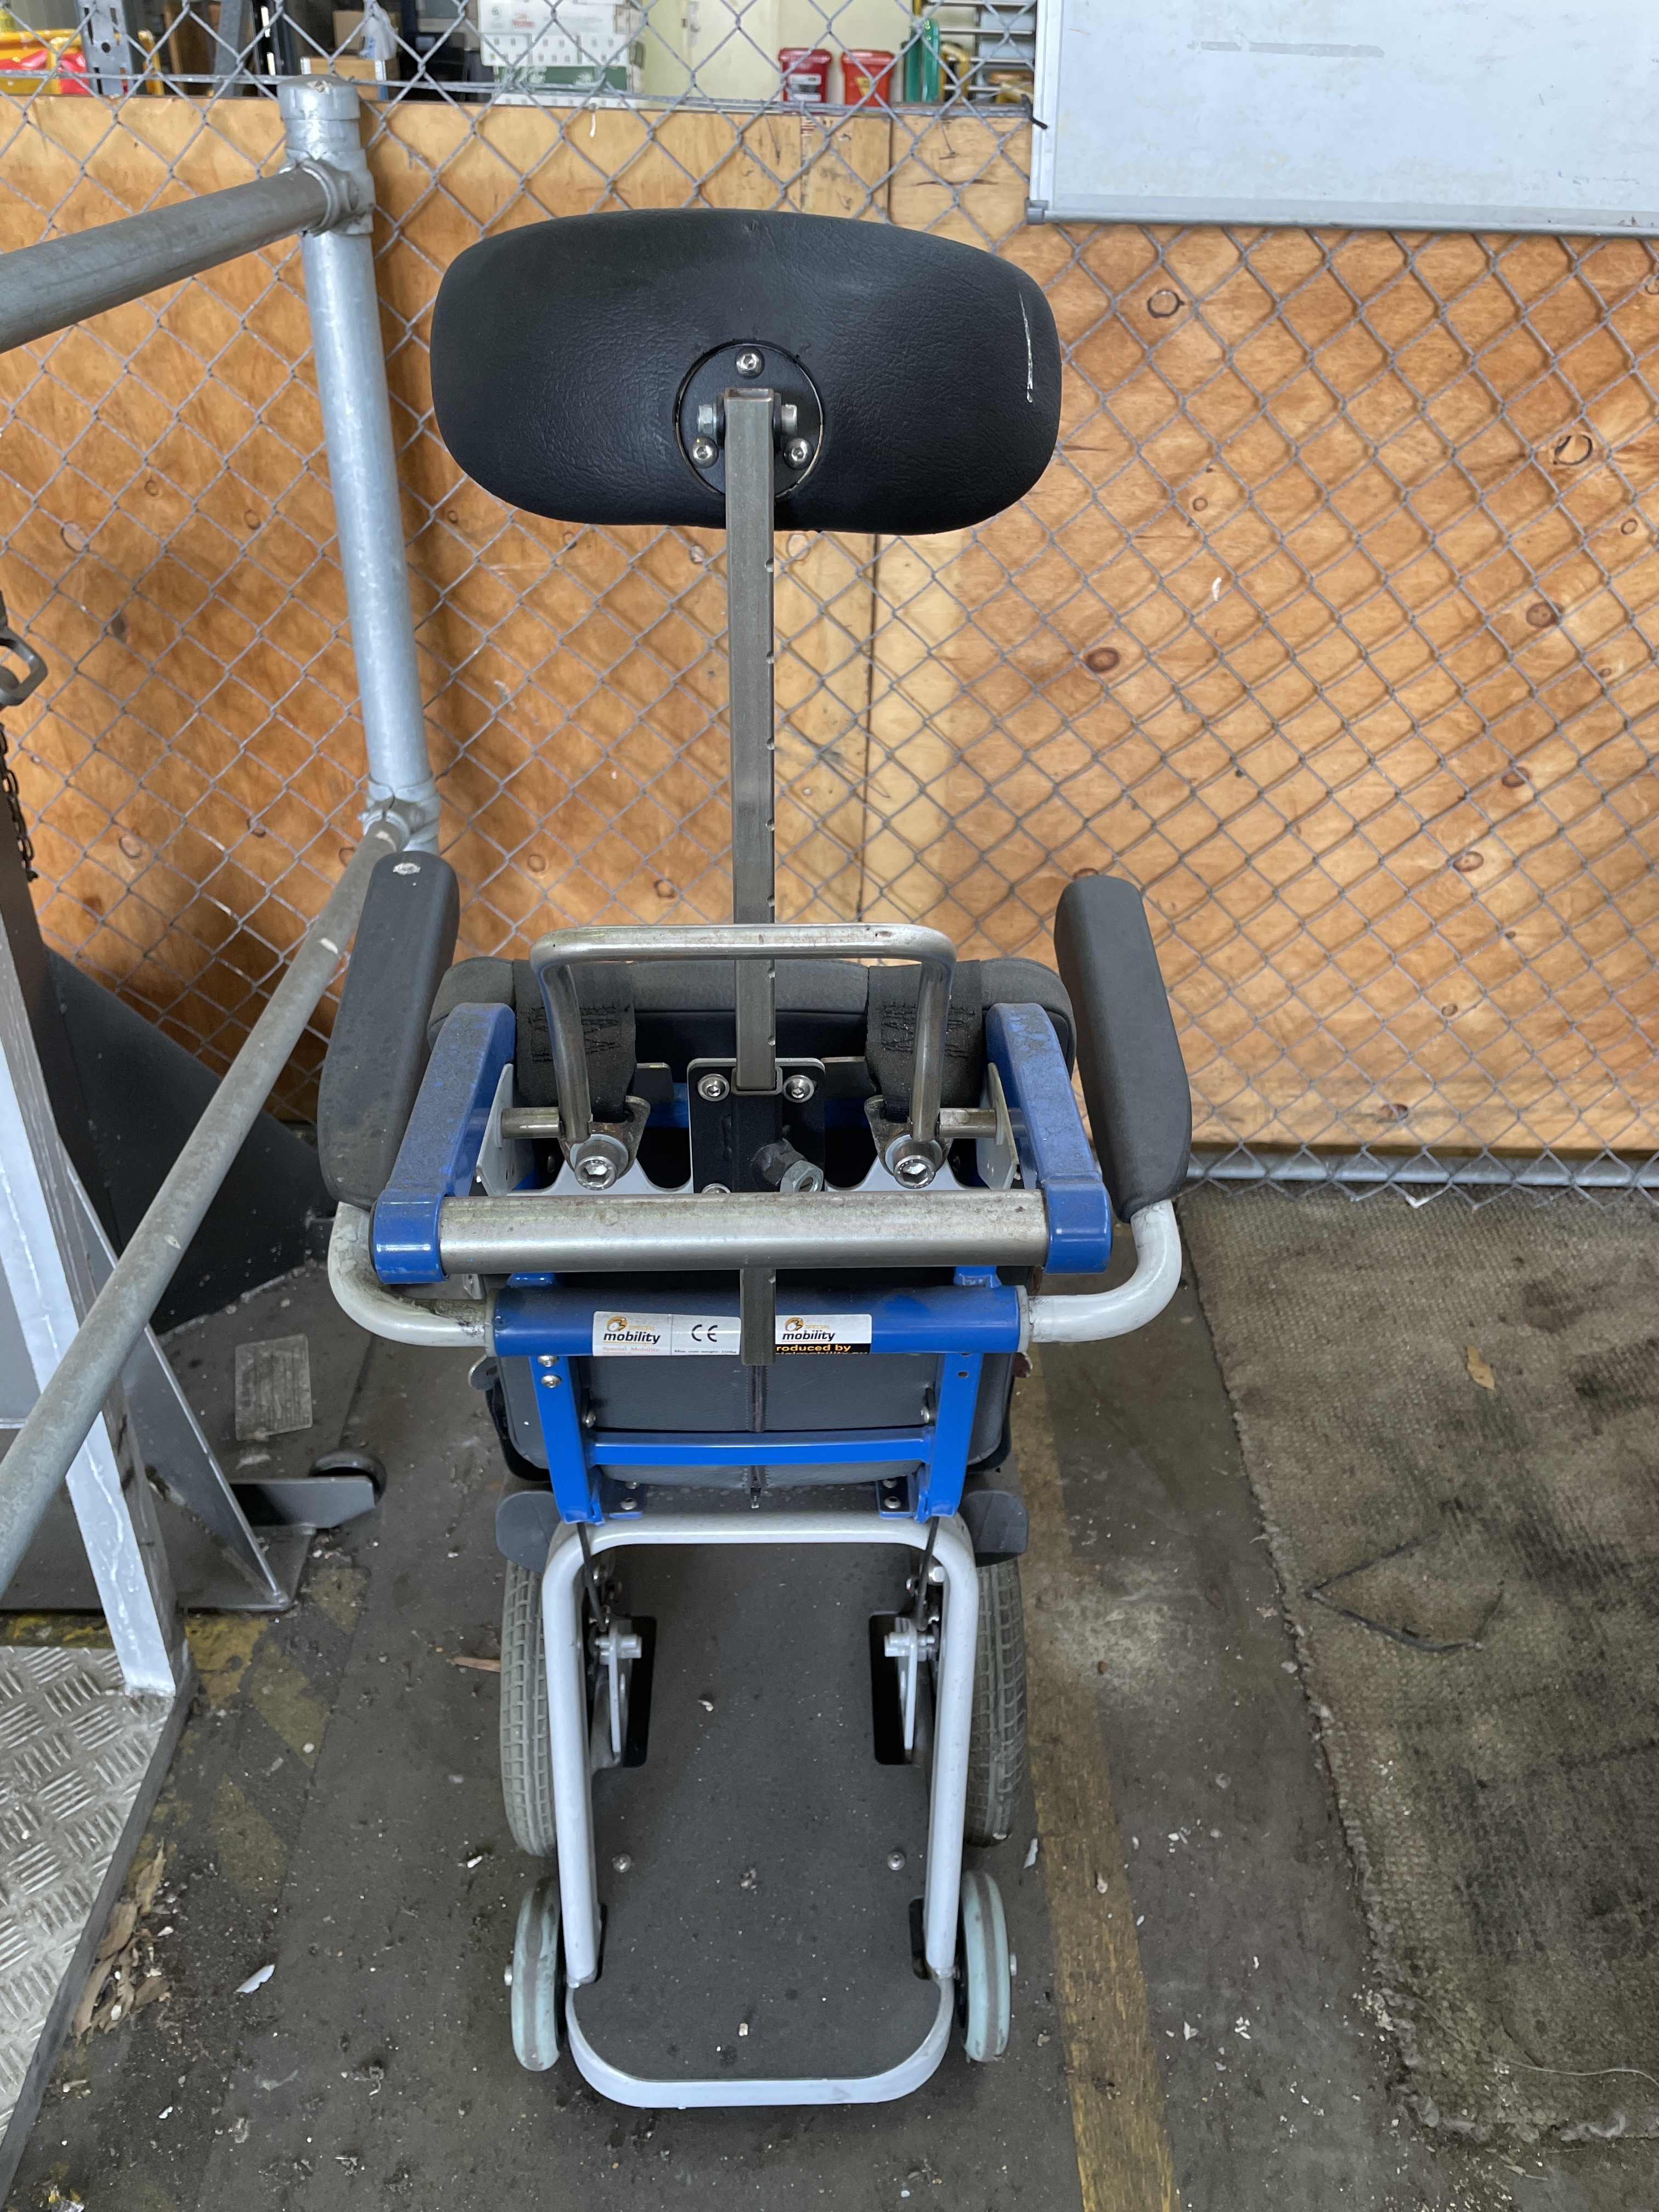 Used forklift: New SPECIALMOBILITY MOBBY AISLE WHEELCHAIR